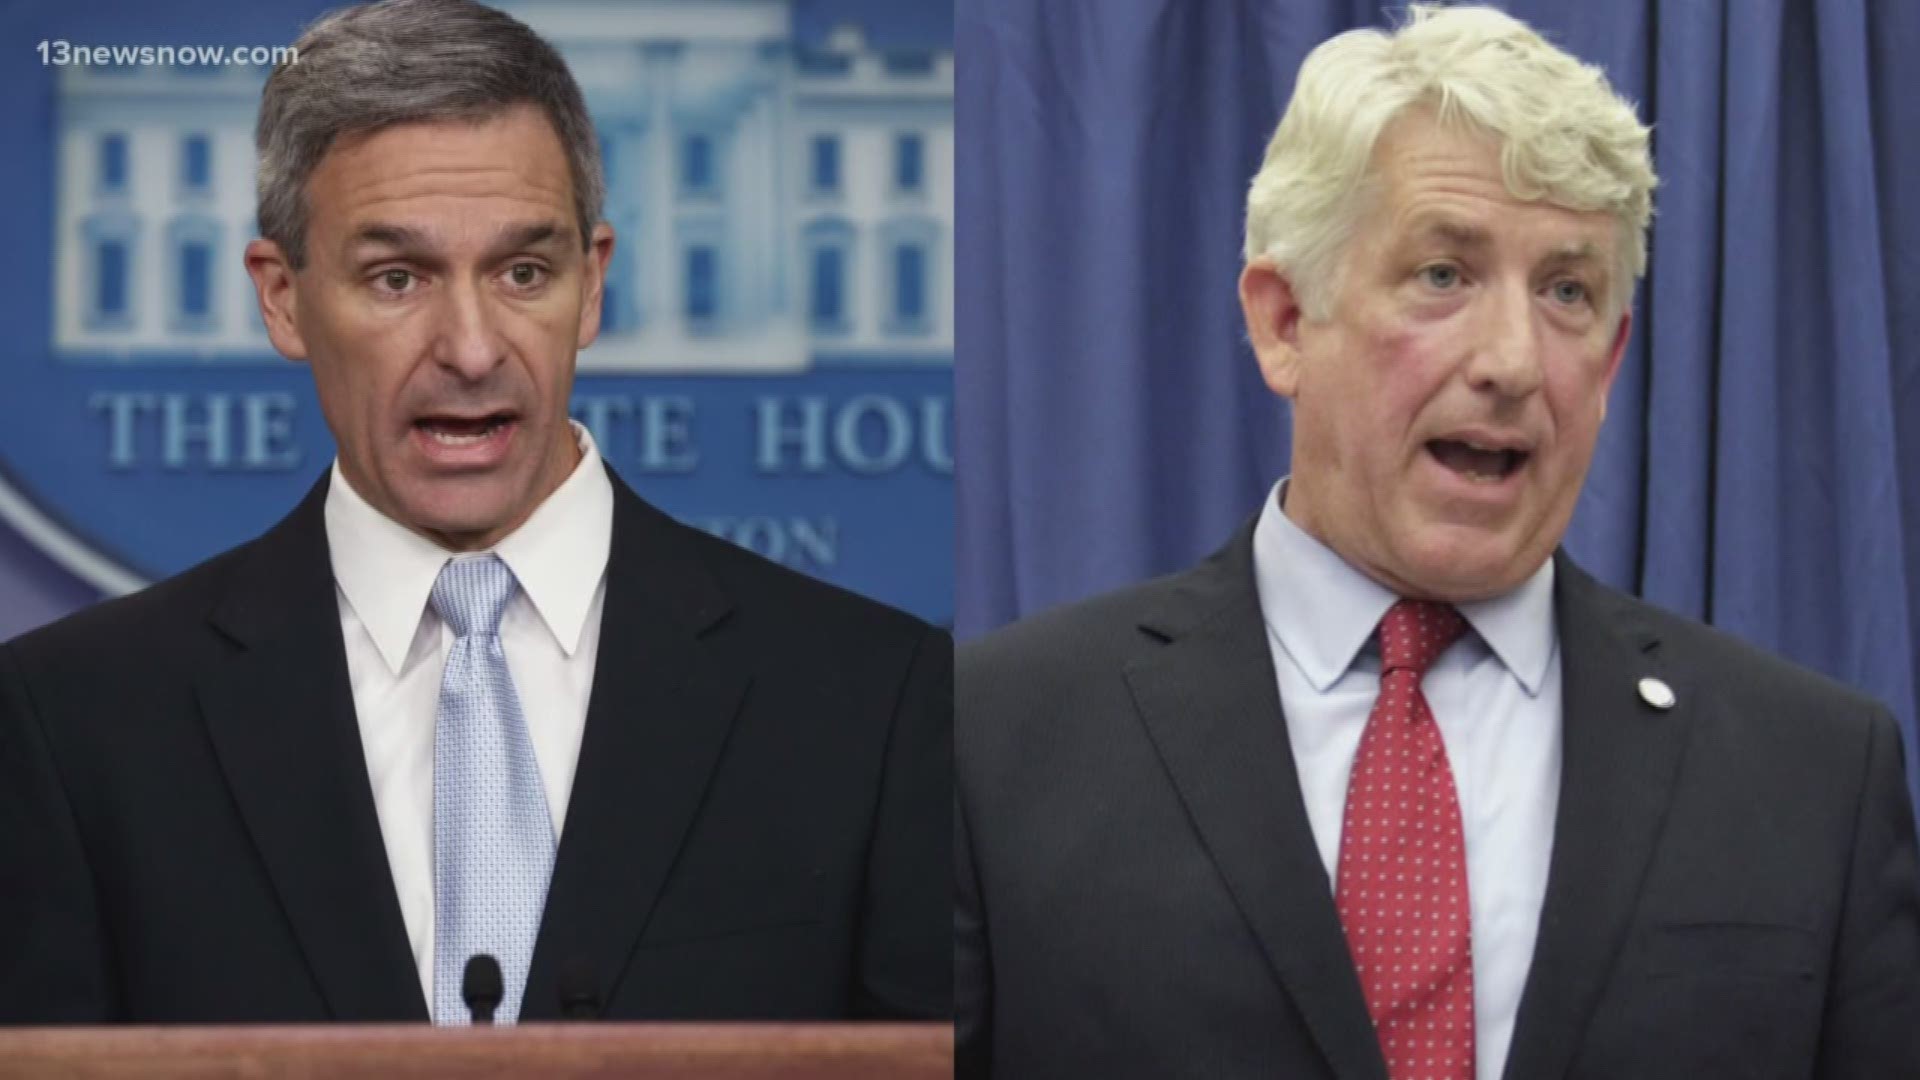 Virginia's Attorney General Mark Herring is facing off against the former Attorney General. A lawsuit has been filed against Ken Cuccinelli!